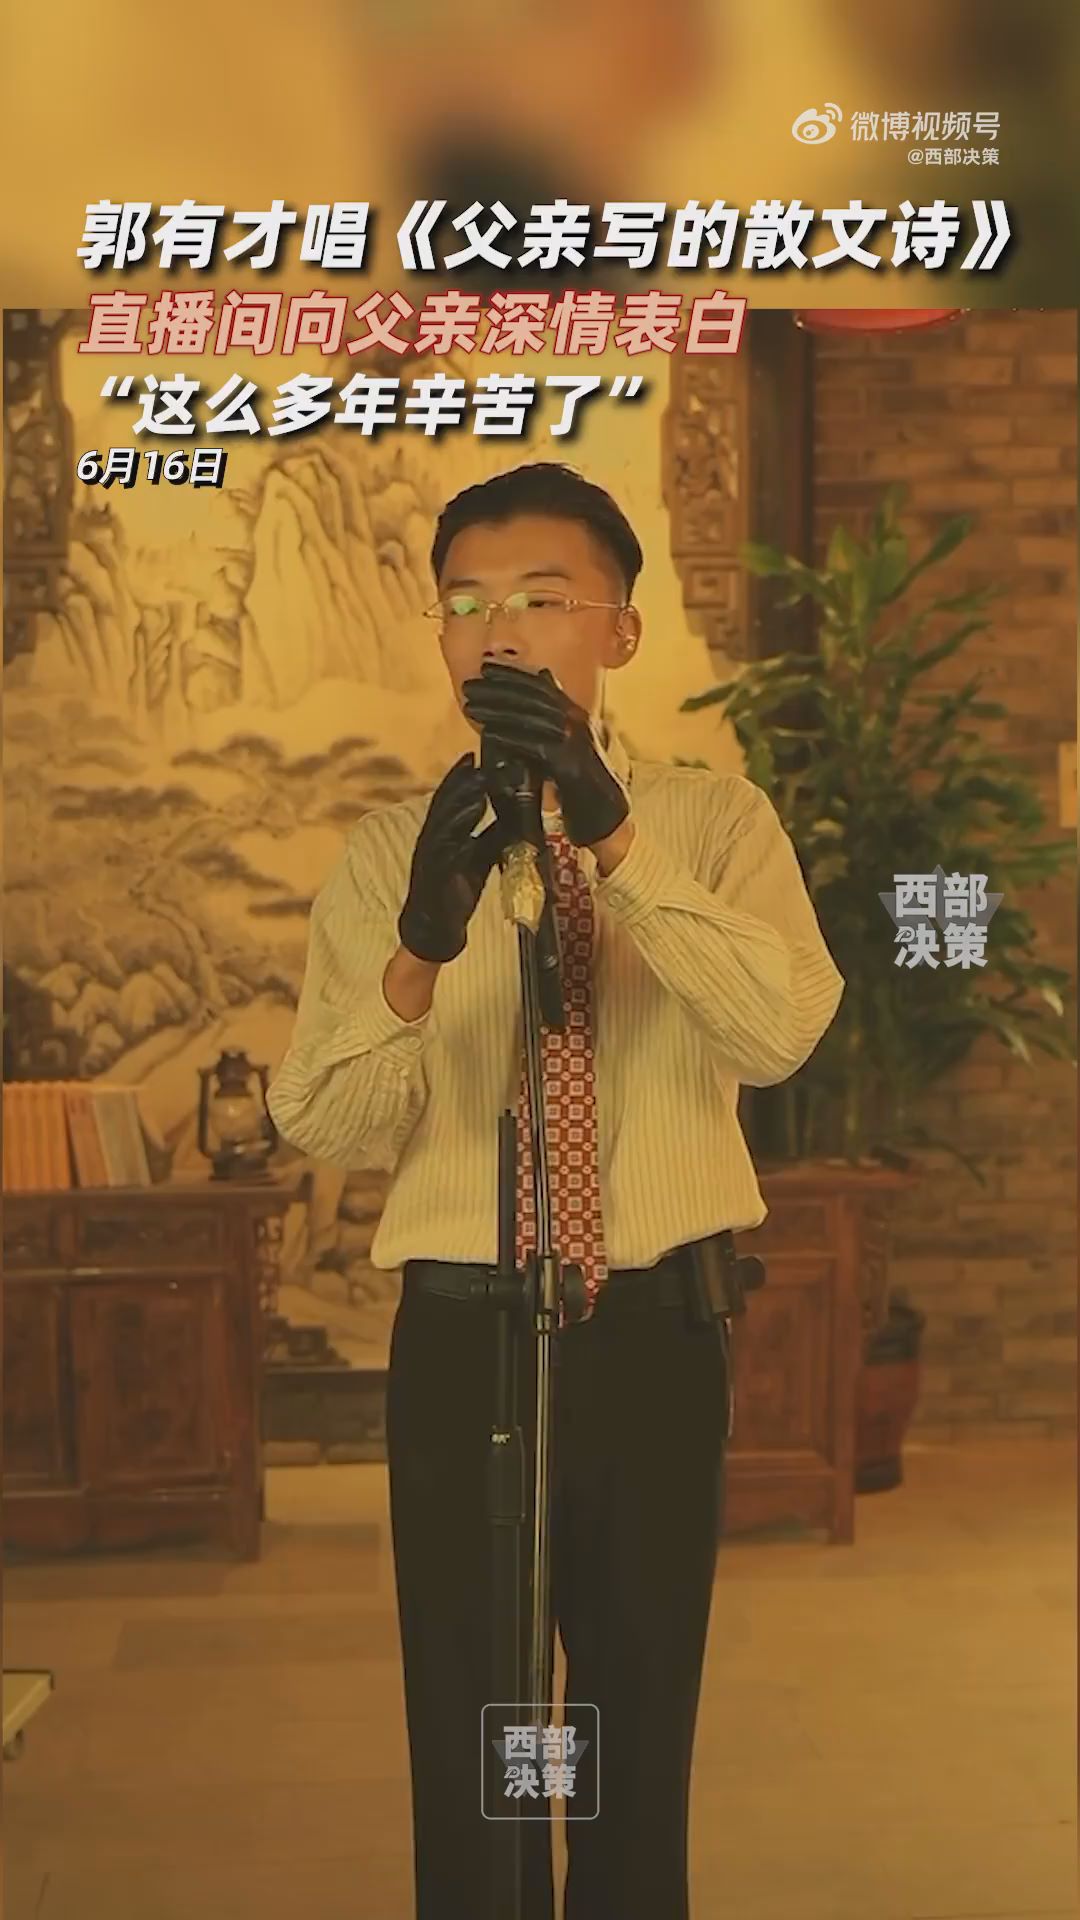  Guo Youcai Confesses His Father Live